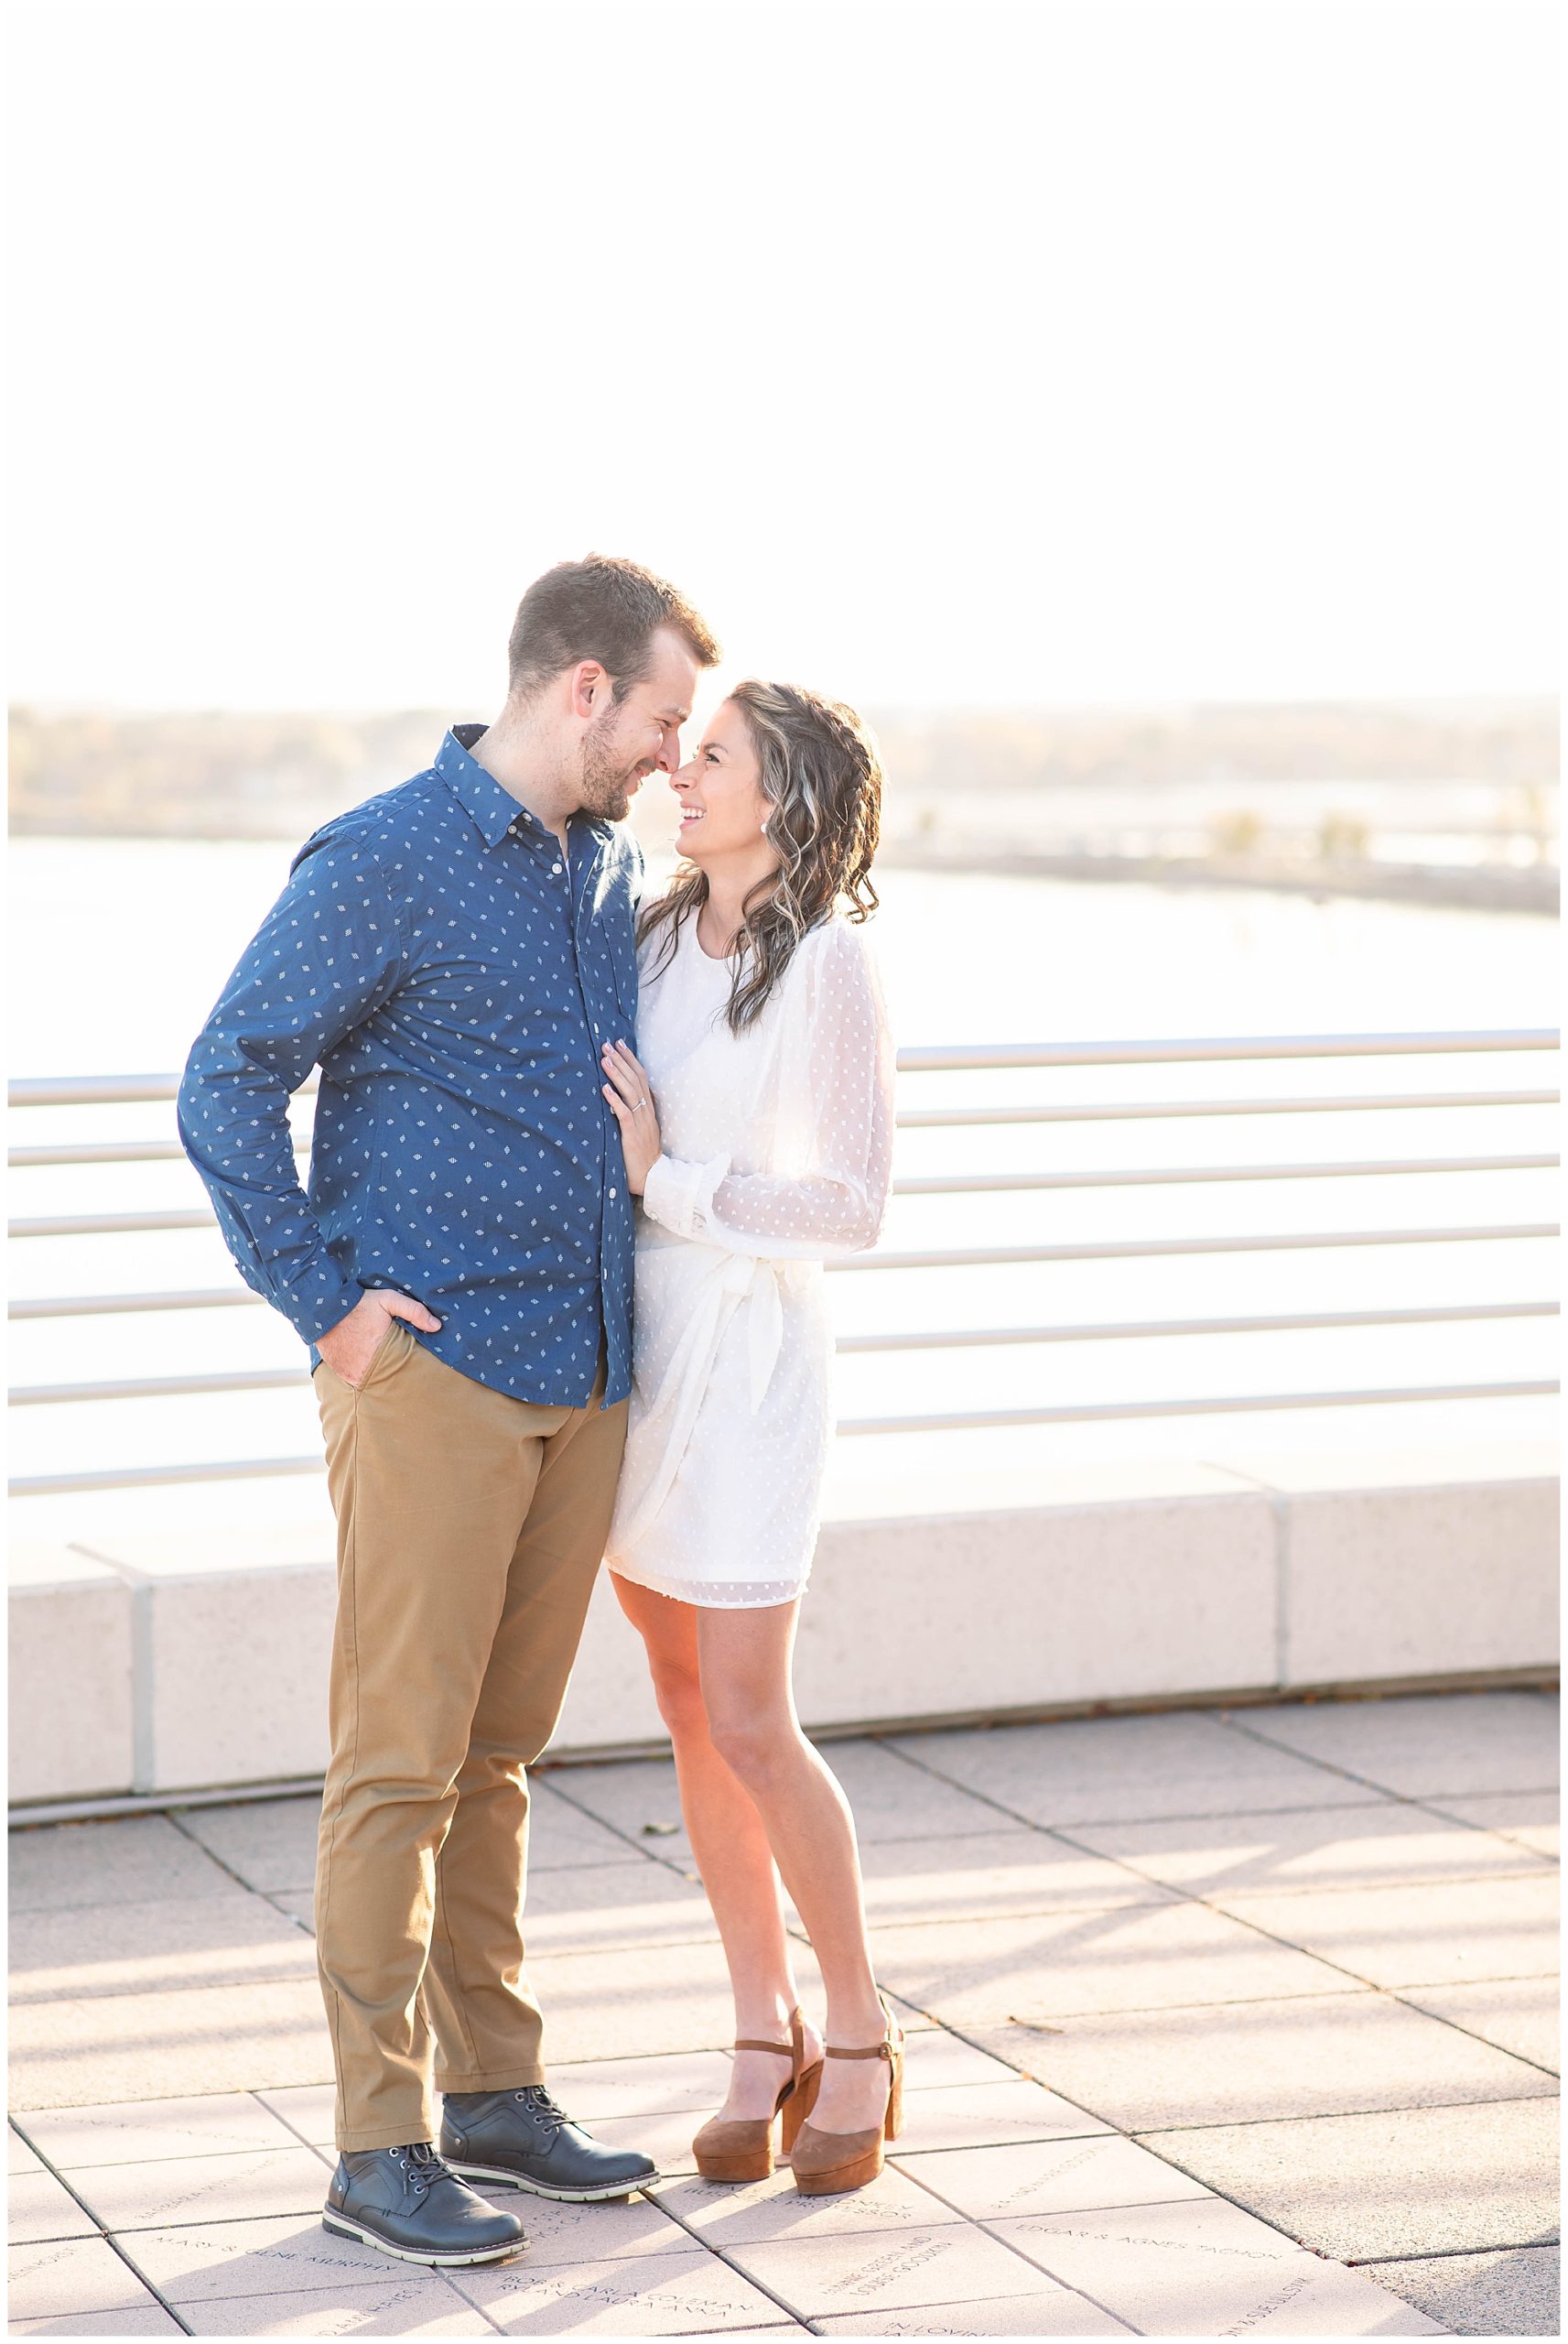 Engagement Photos at Monona Terrace in Madison WI 